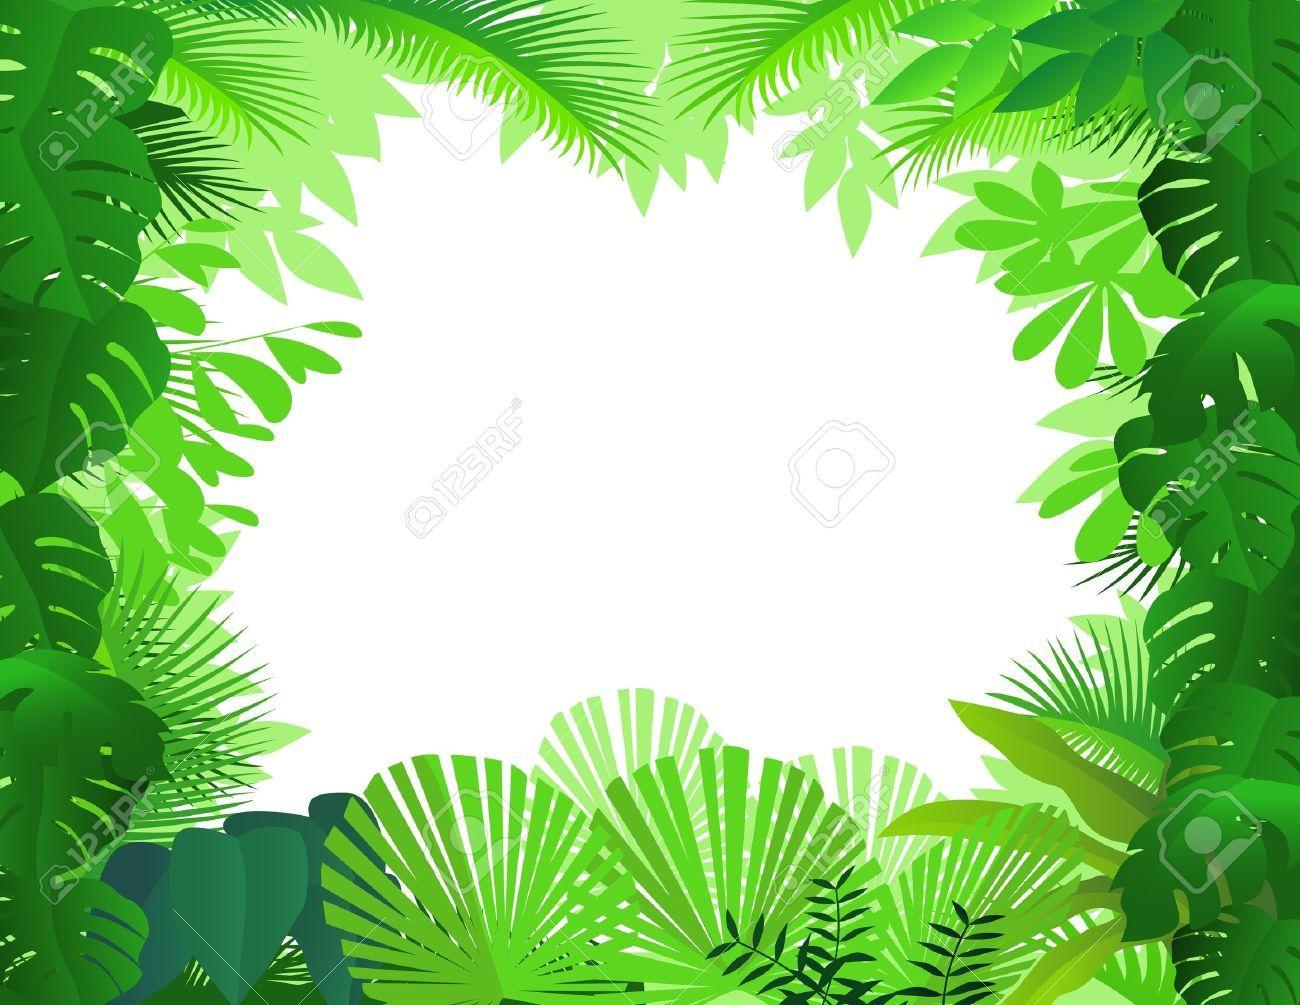 Rainforest clipart background and in color rainforest